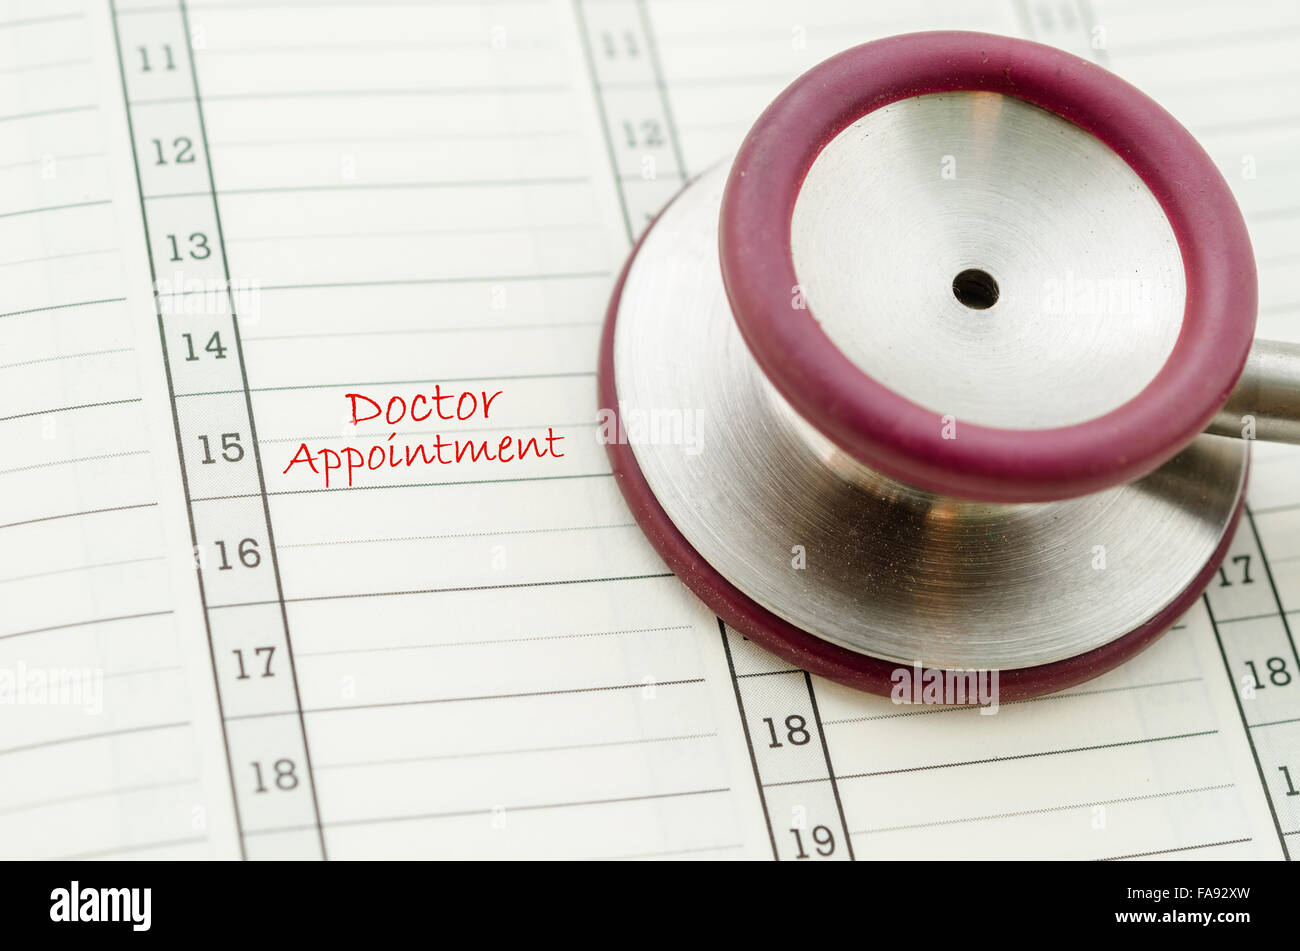 A scheduled doctors appointment is wrote on a calendar for a patient with stethoscope. Stock Photo